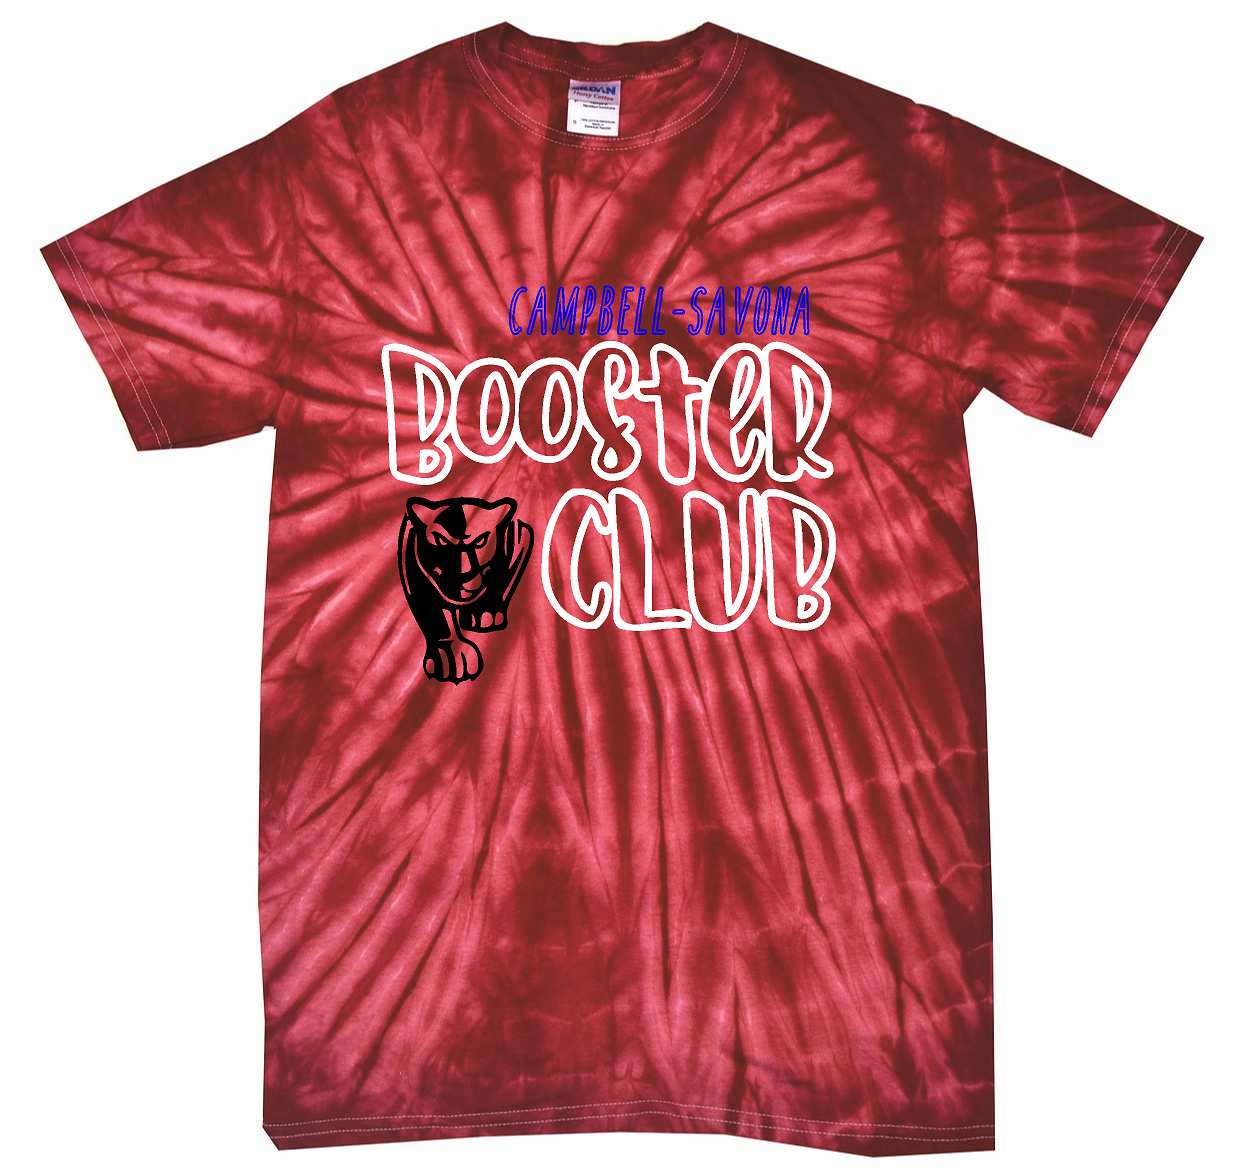 Campbell Savona Boosters Adult Unisex Tie Dye Tshirt